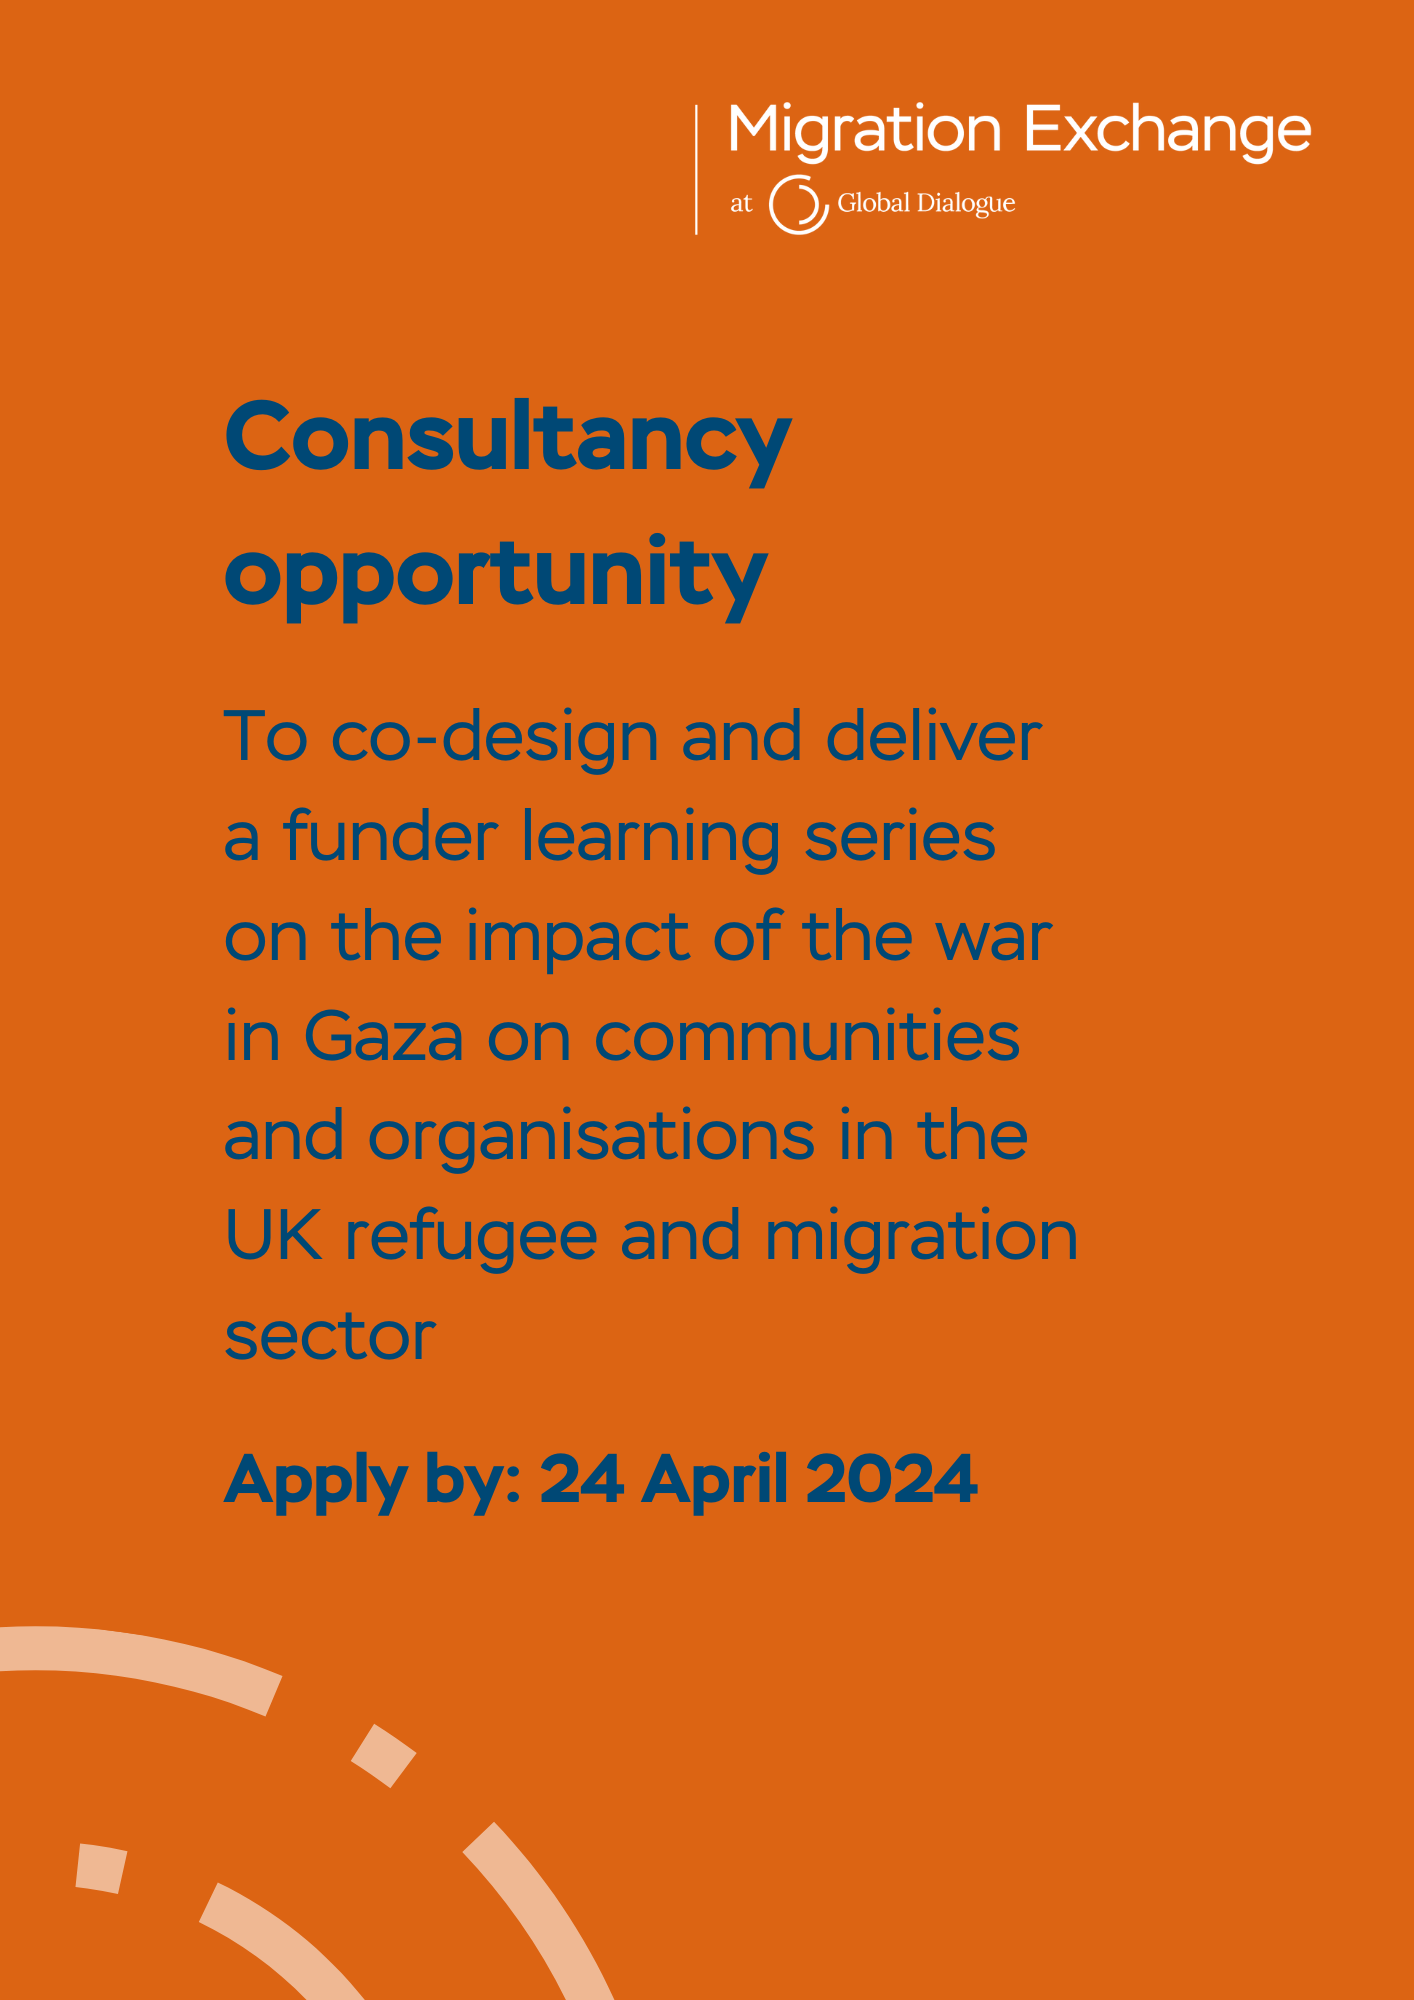 [closed] Consultancy opportunity: co-design and deliver a funder learning series on Palestine